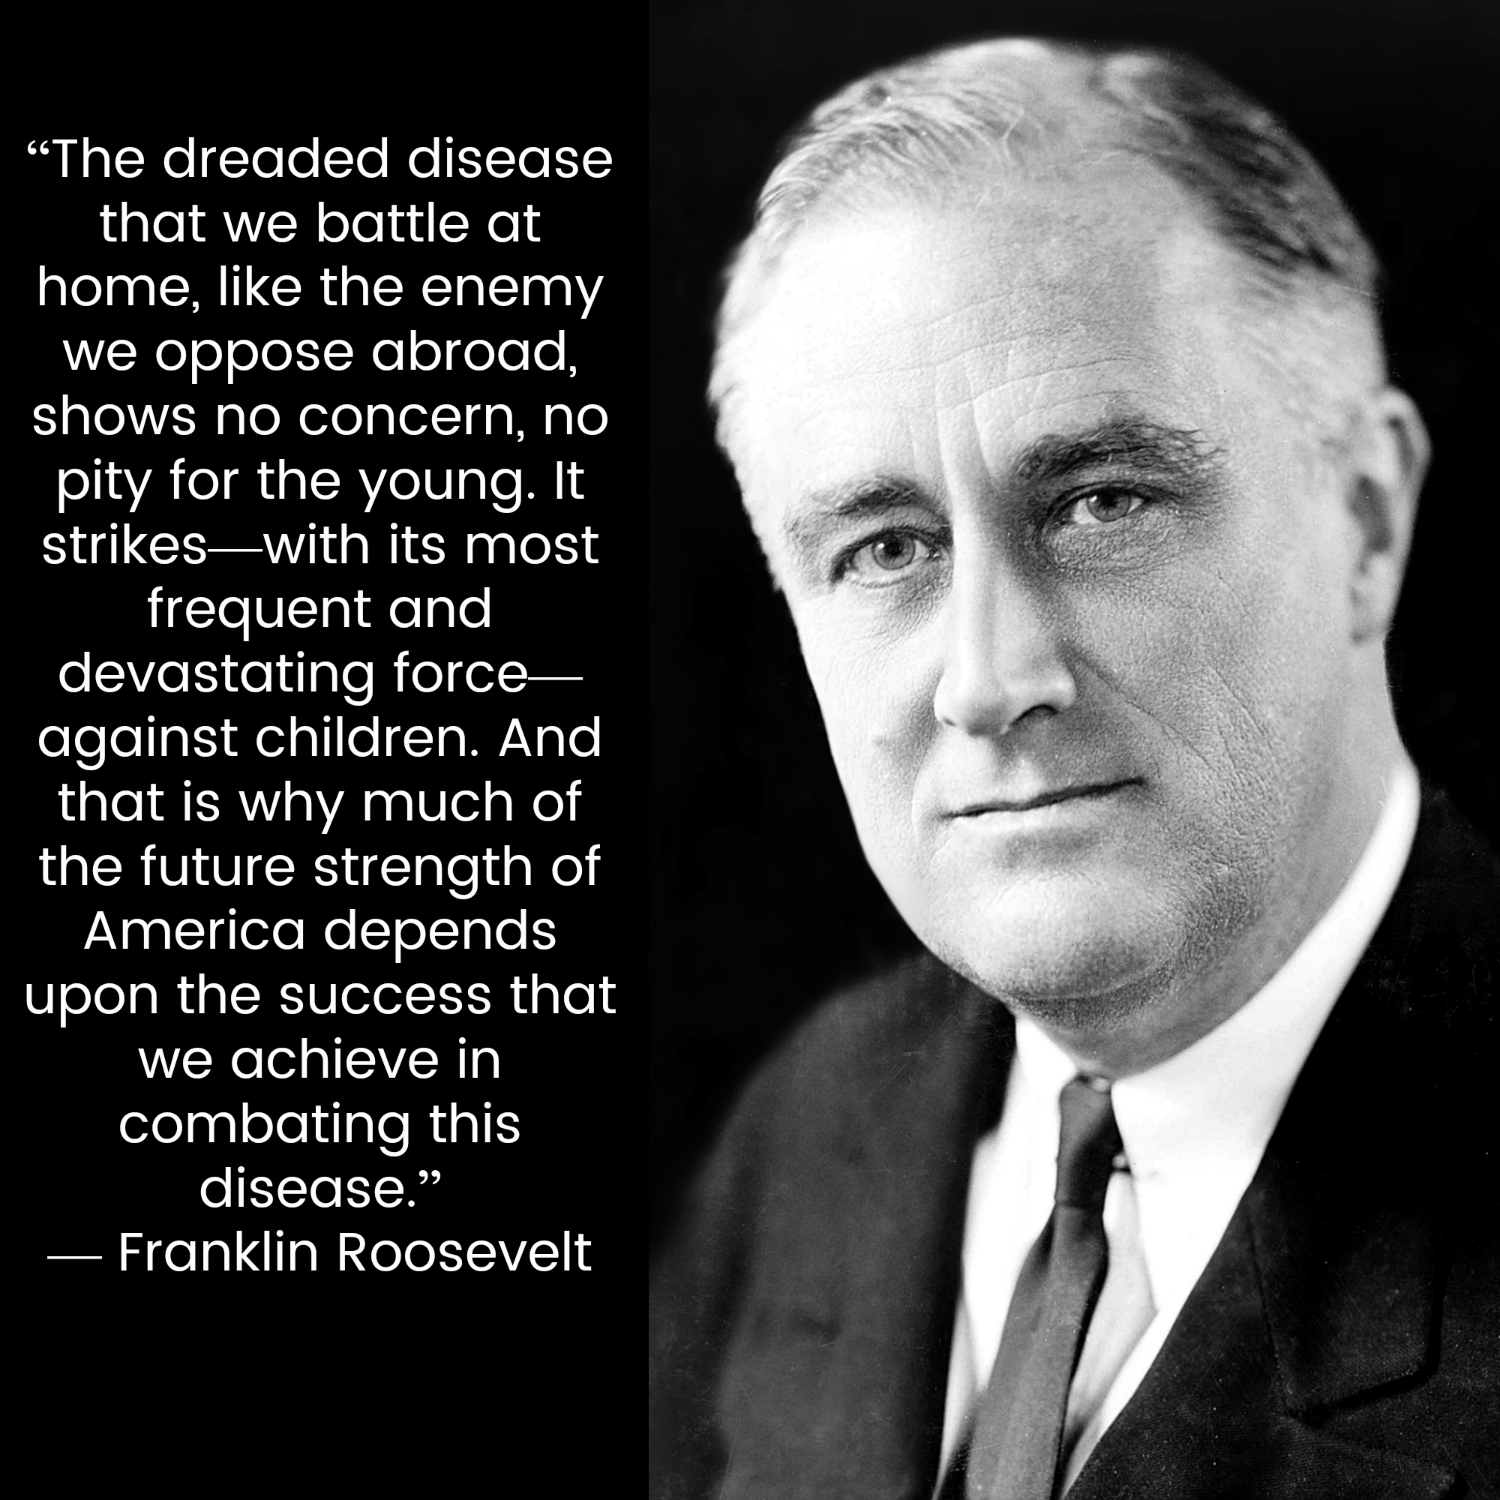 “The dreaded disease that we battle at home, like the enemy we oppose abroad, shows no concern, no pity for the young. It strikes—with its most frequent and devastating force— against children. And that is why much of the future strength of America depends upon the success that we achieve in combating this disease.” — Franklin D. Roosevelt